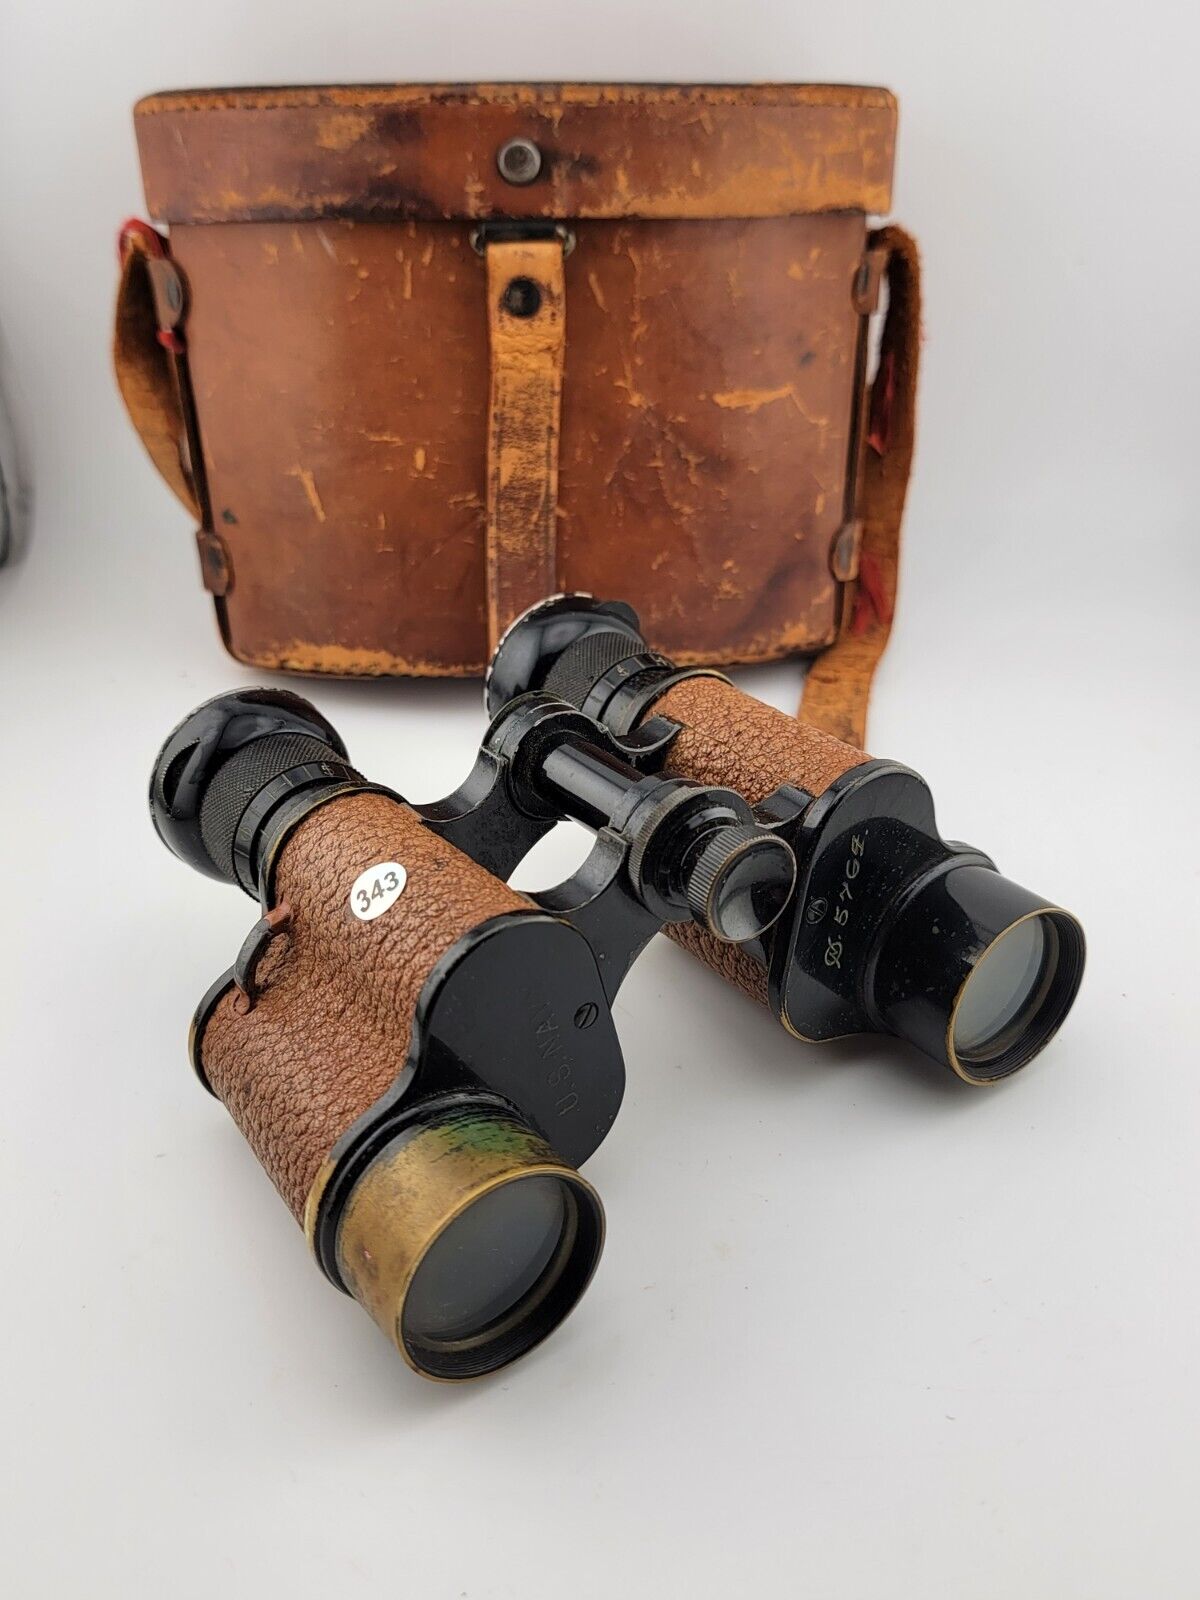 Rare Antique WWI US Navy Marine Binoculars Bausch and Lomb Prism Stereo 6x30 WW1